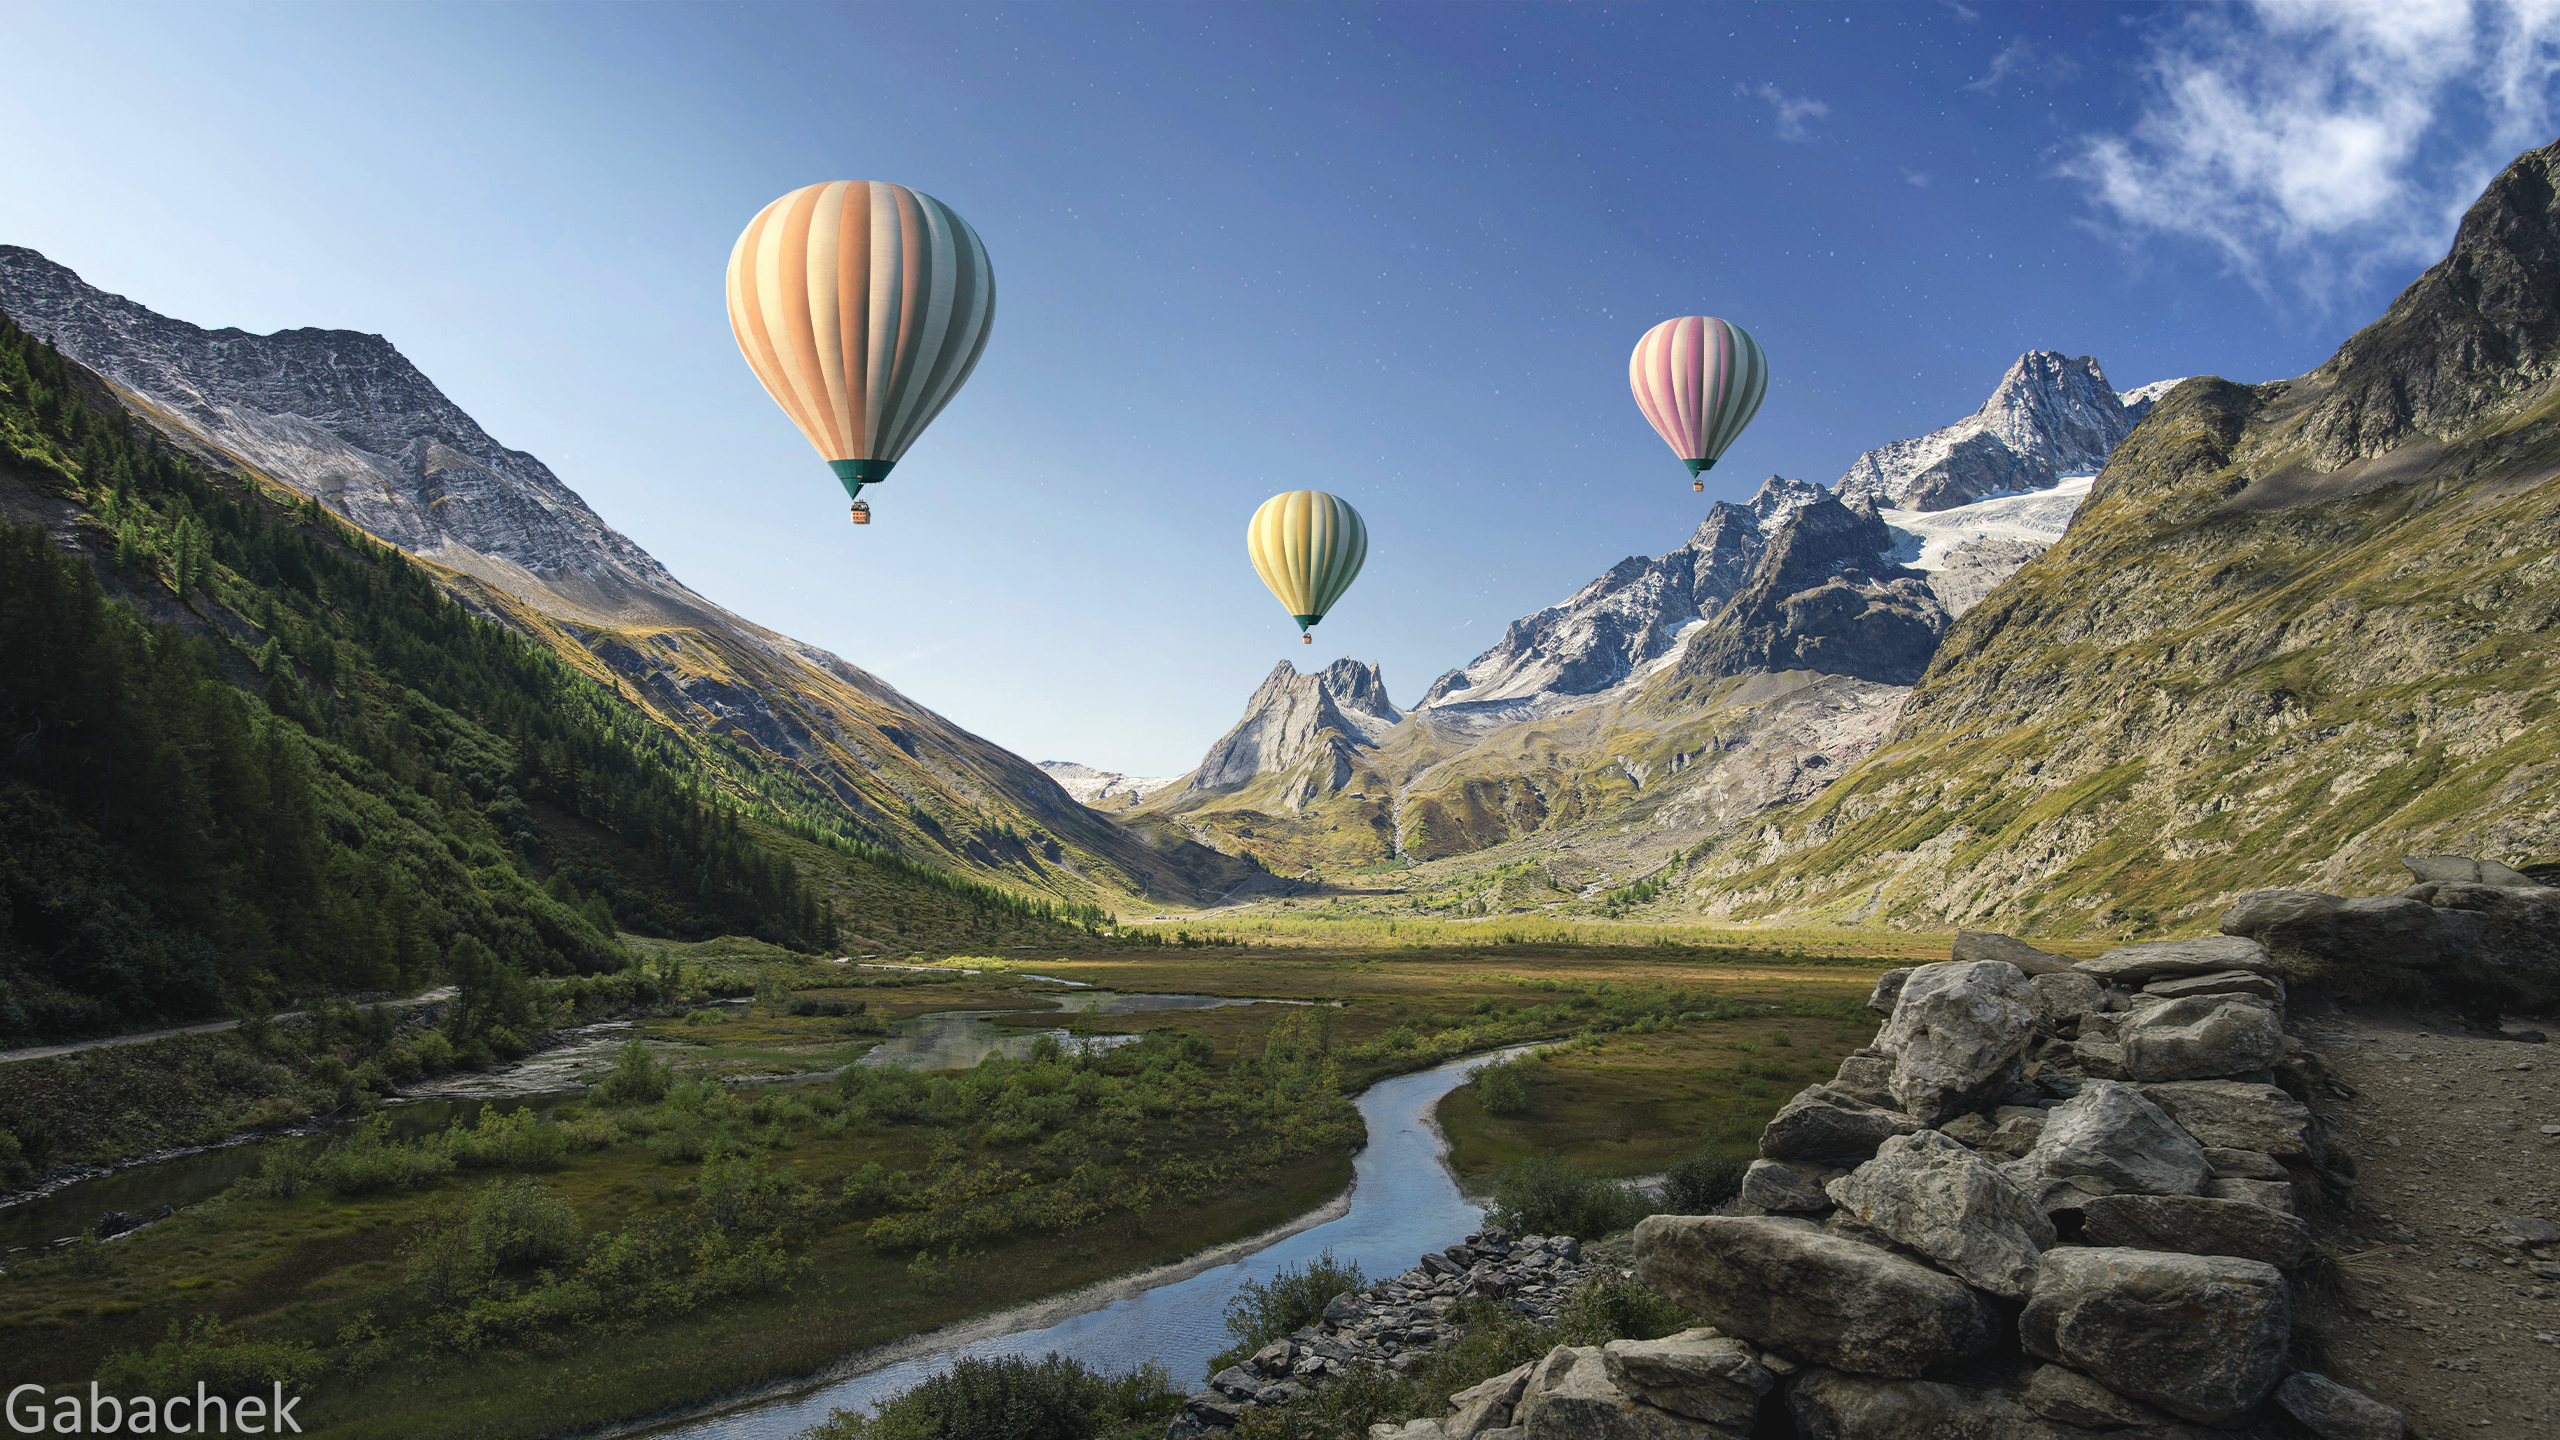 General 2560x1440 Gabachek hot air balloons mountains gorge landscape sky clouds stars river stones nature forest photo manipulation HDR CGI watermarked sun rays photoshopped water snow rocks sunlight